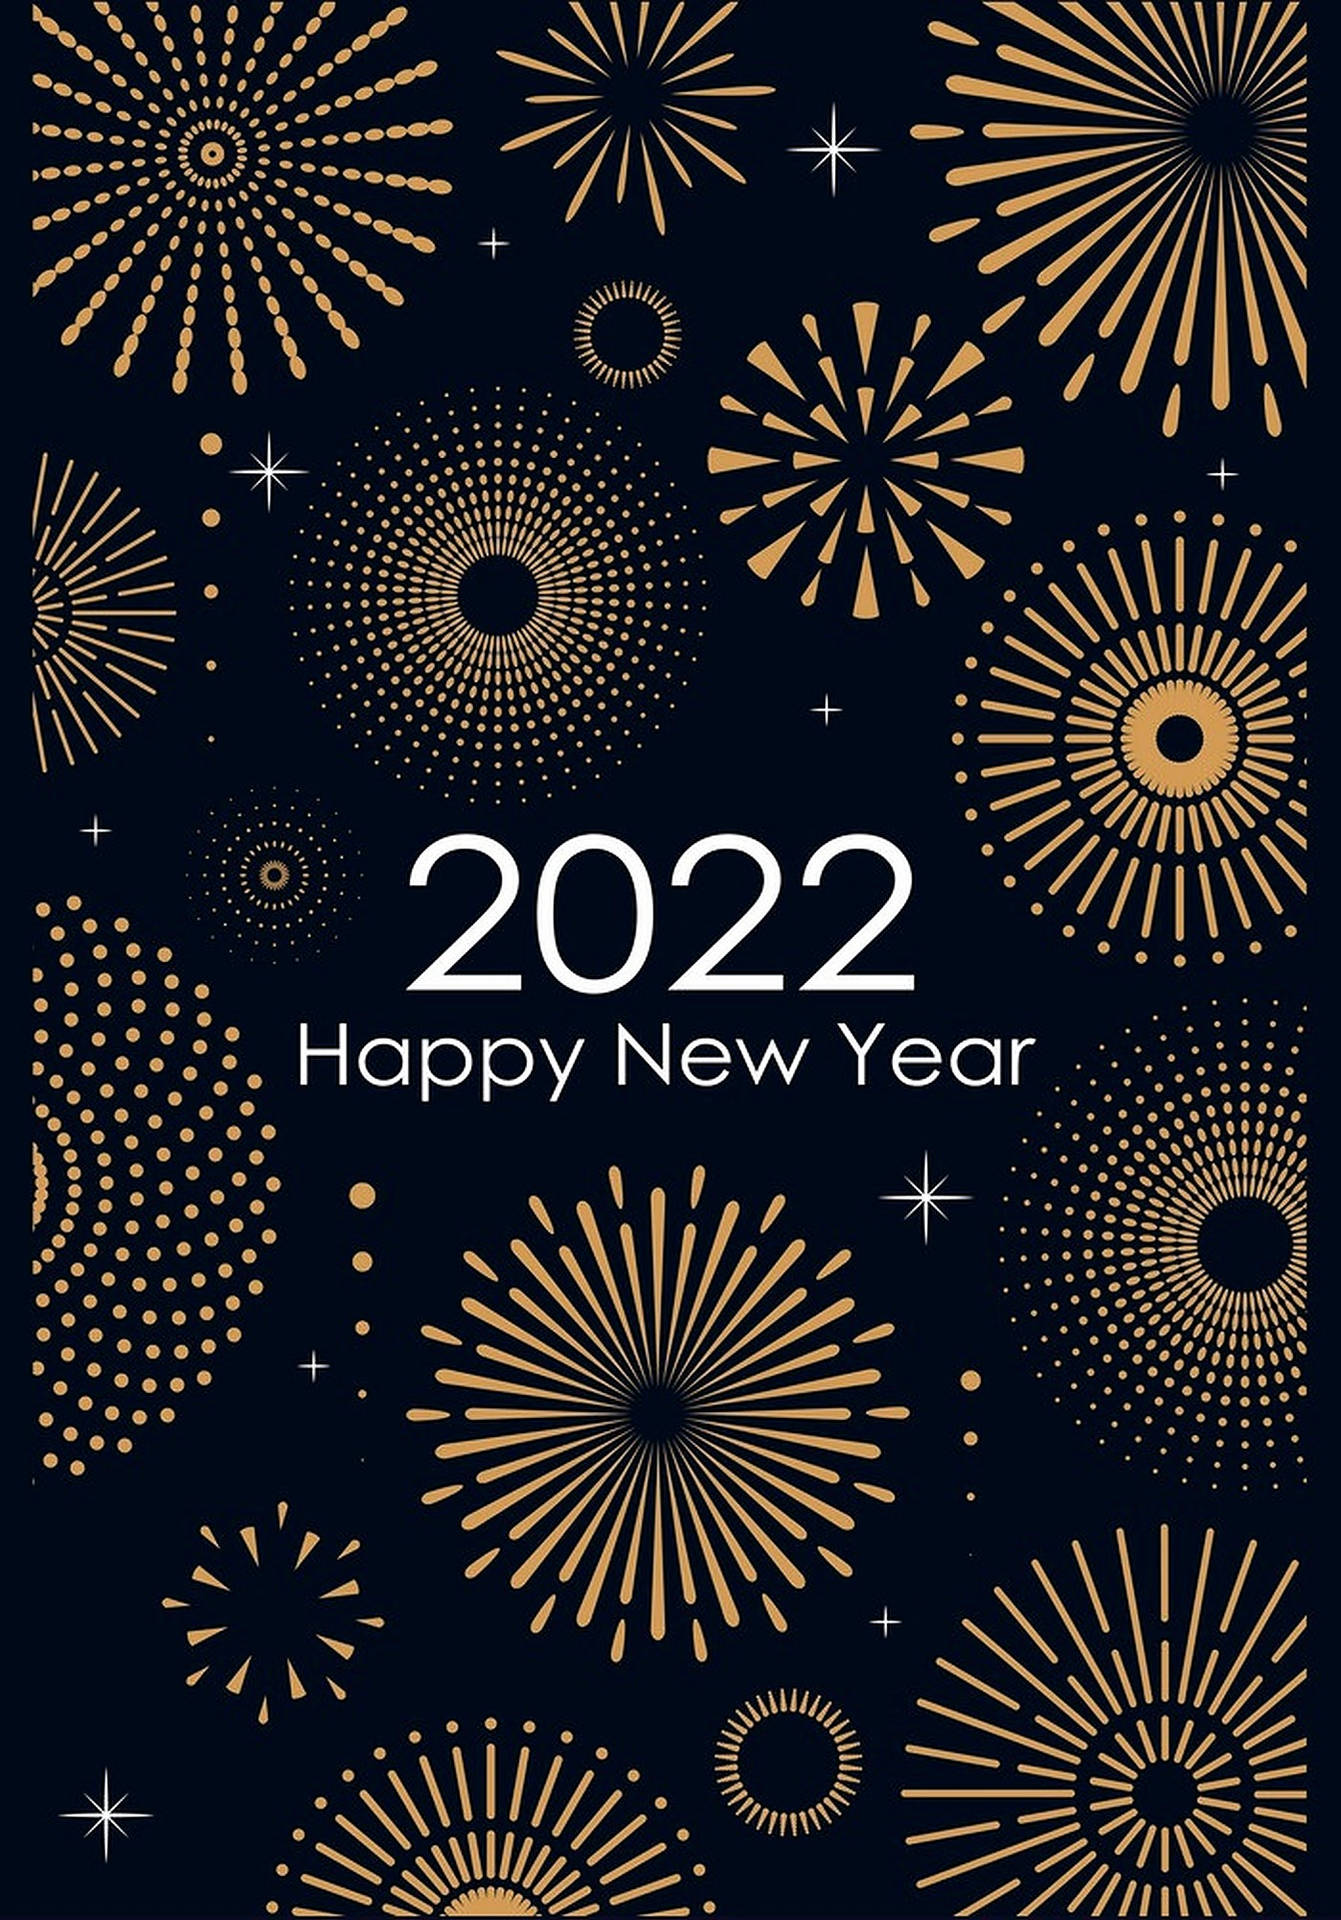 Happy New Year 2022 Fireworks Wallpaper